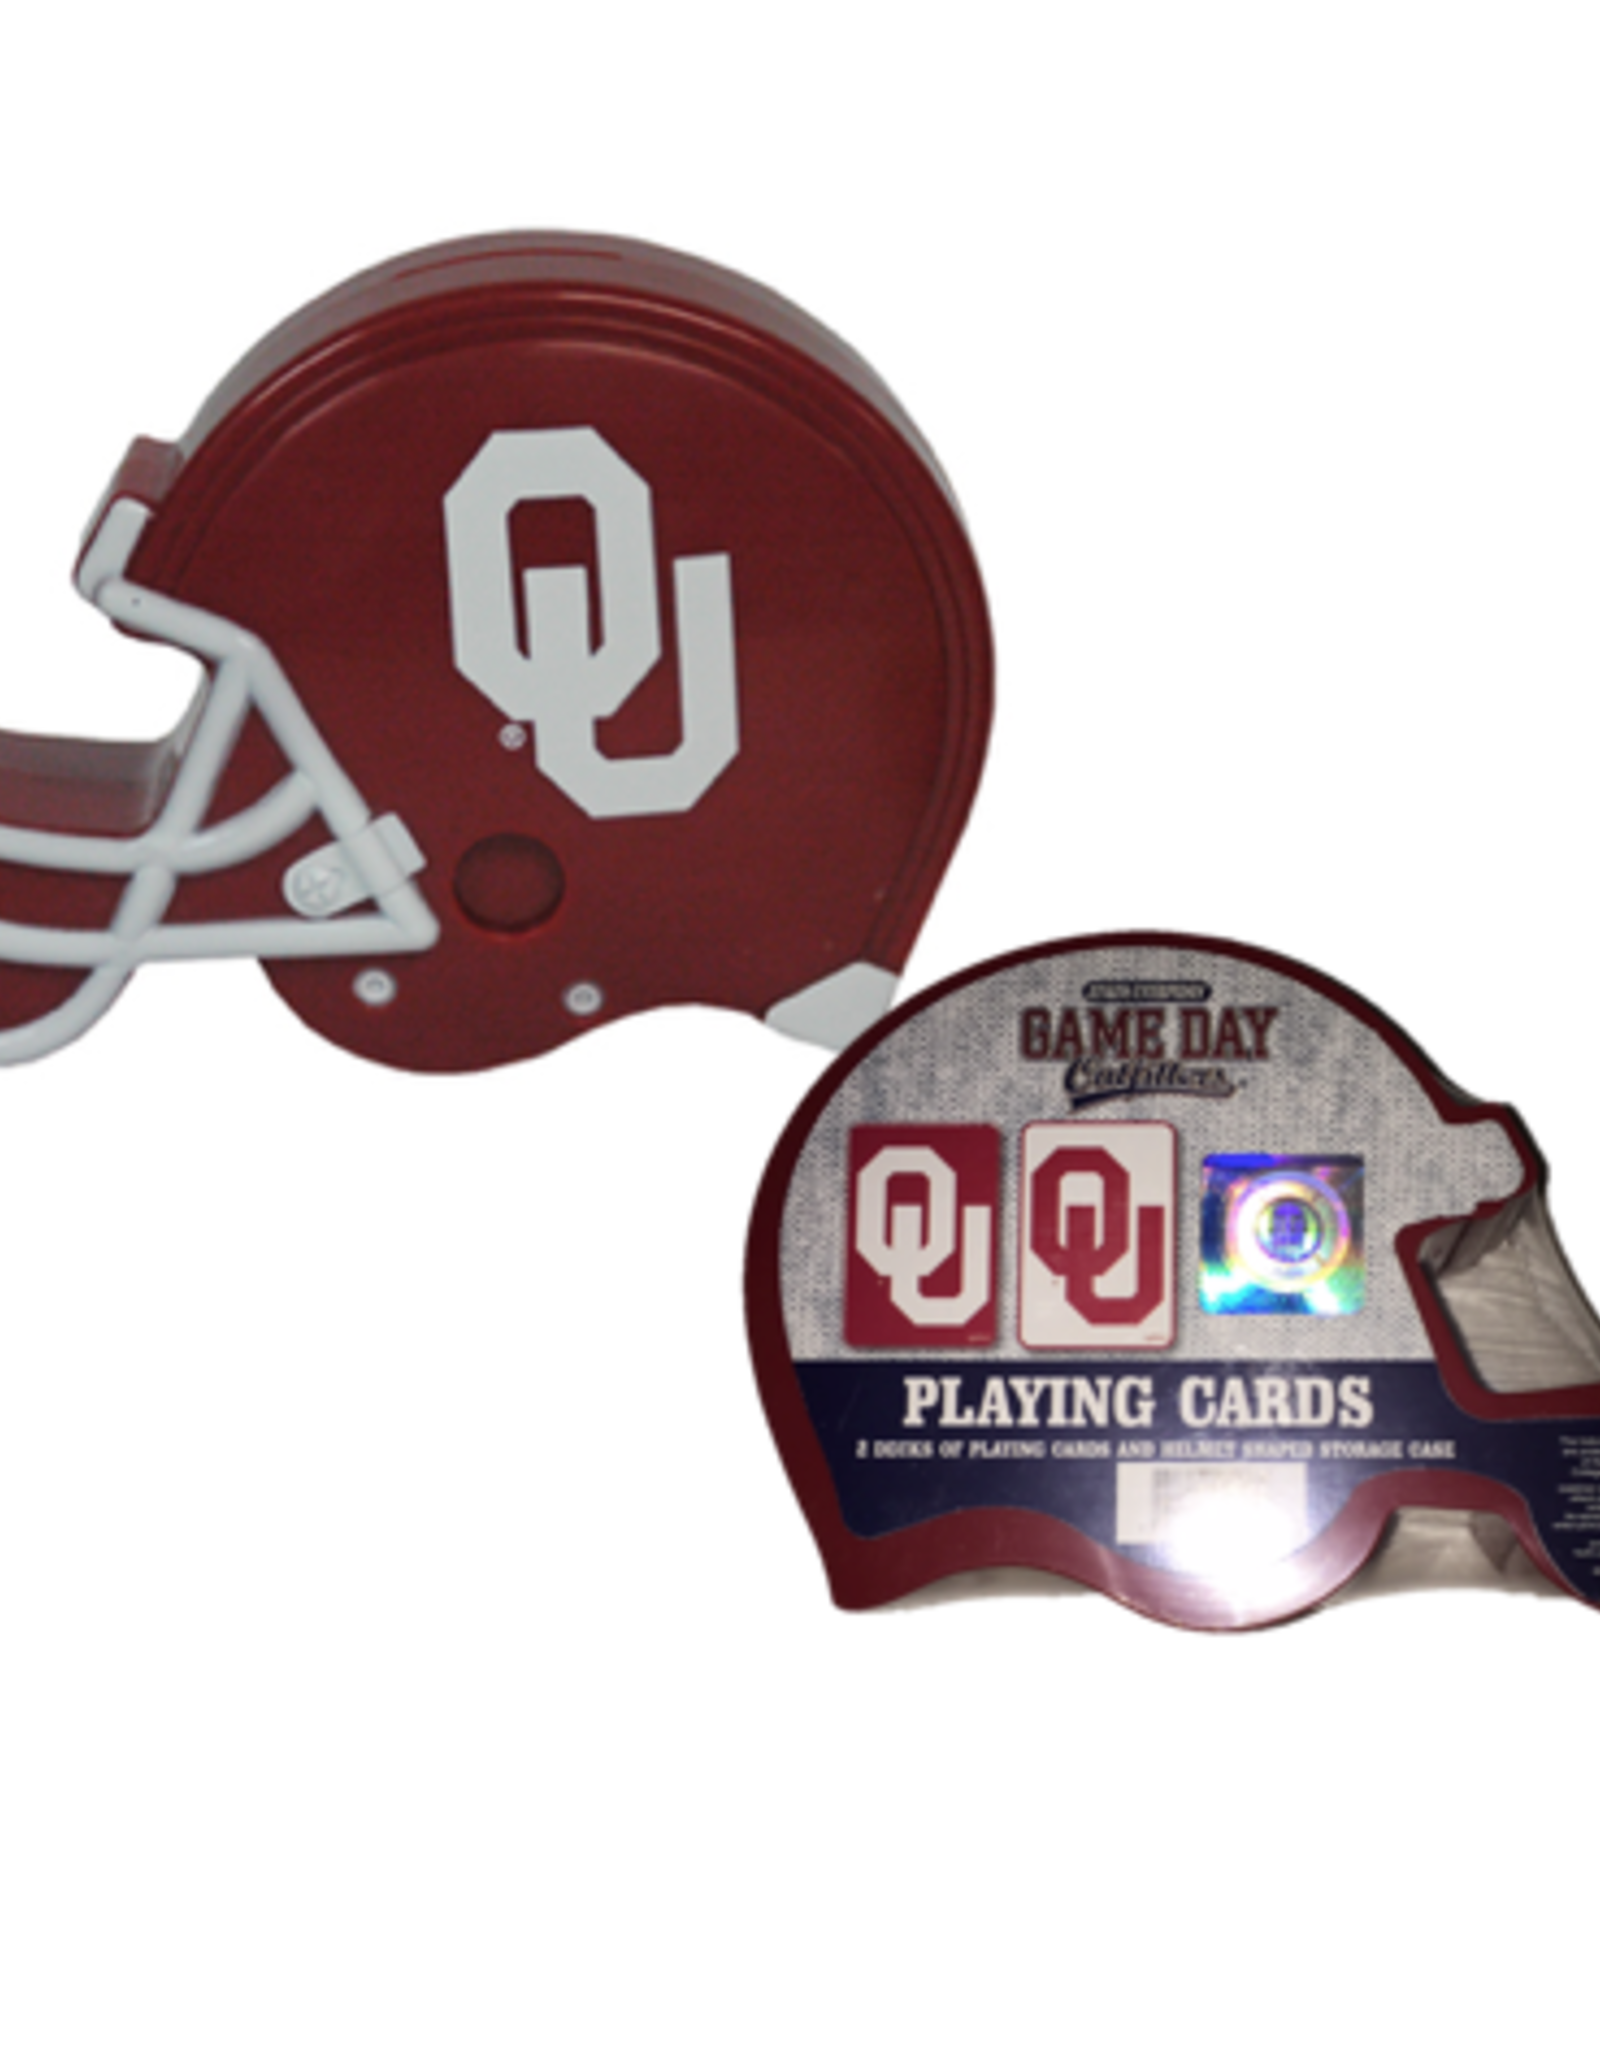 Game Day Outfitters Jenkins Helmet Case OU 2pk Playing Cards